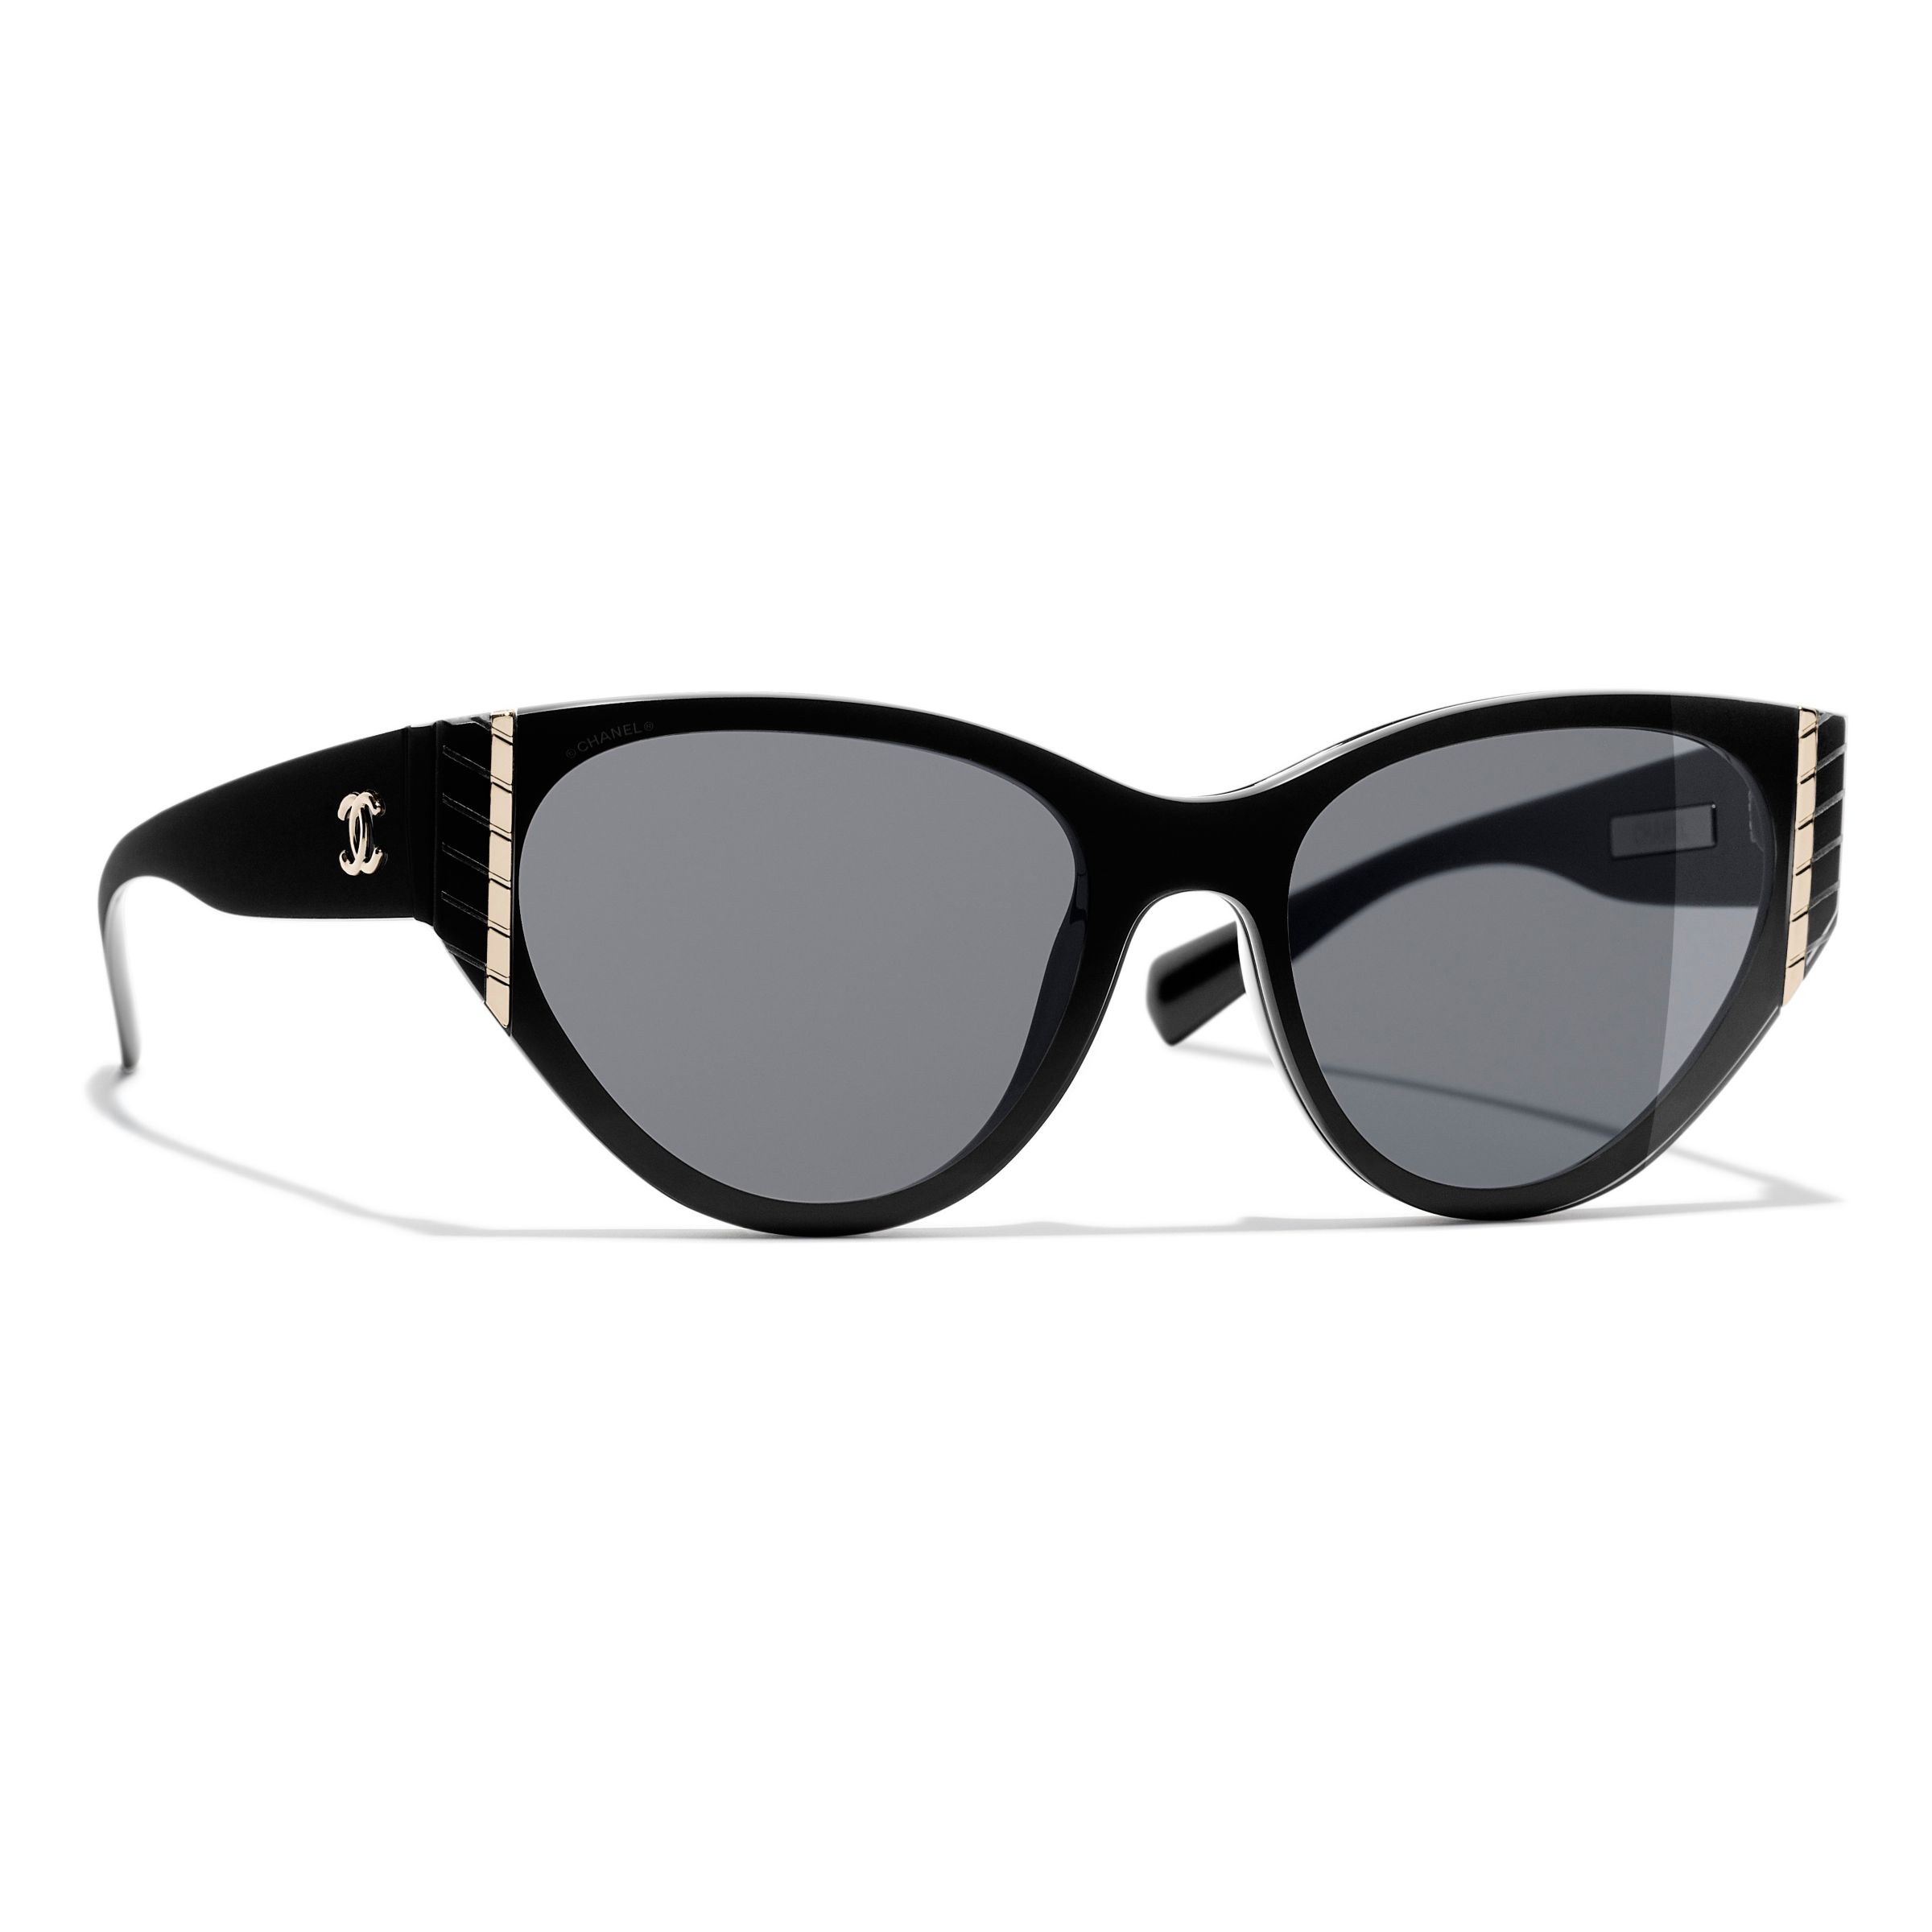 CHANEL Oval Sunglasses CH6054 Black/Grey at John Lewis & Partners